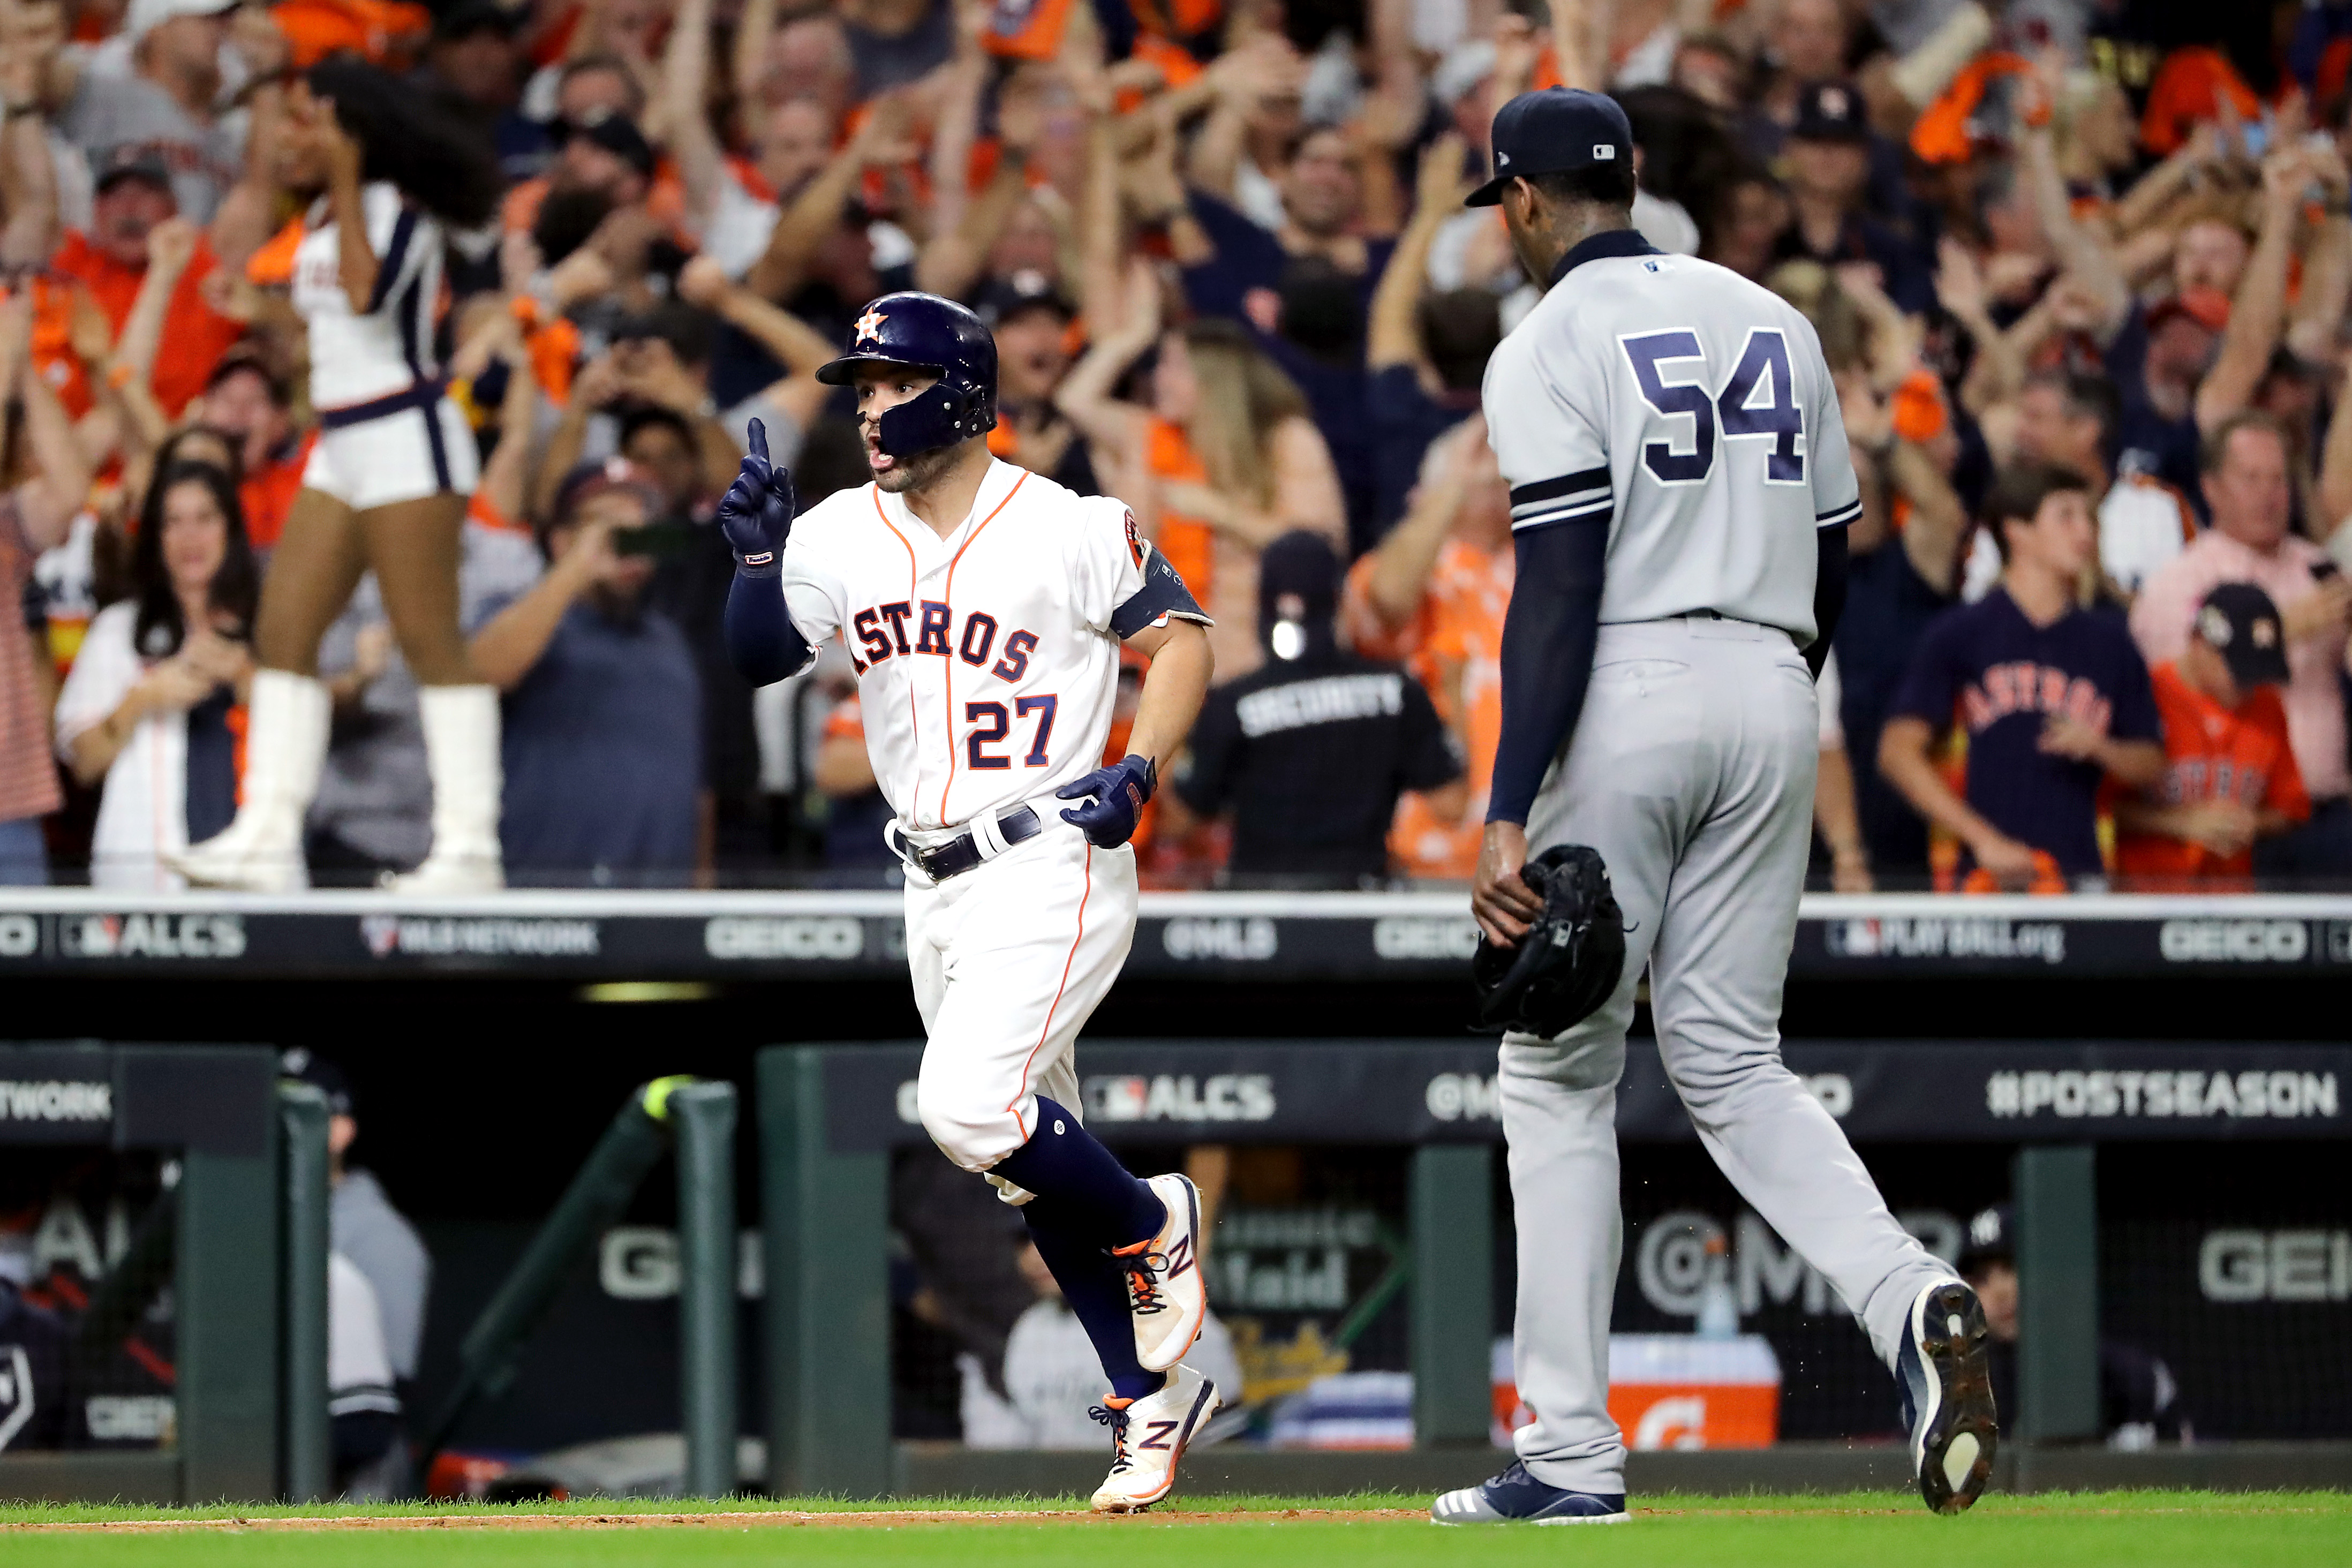 the Houston Astros’ Jose Altuve trots toward home plate past the New York Yankees’ Aroldis Chapman walking off the field as fans celebrate in the background